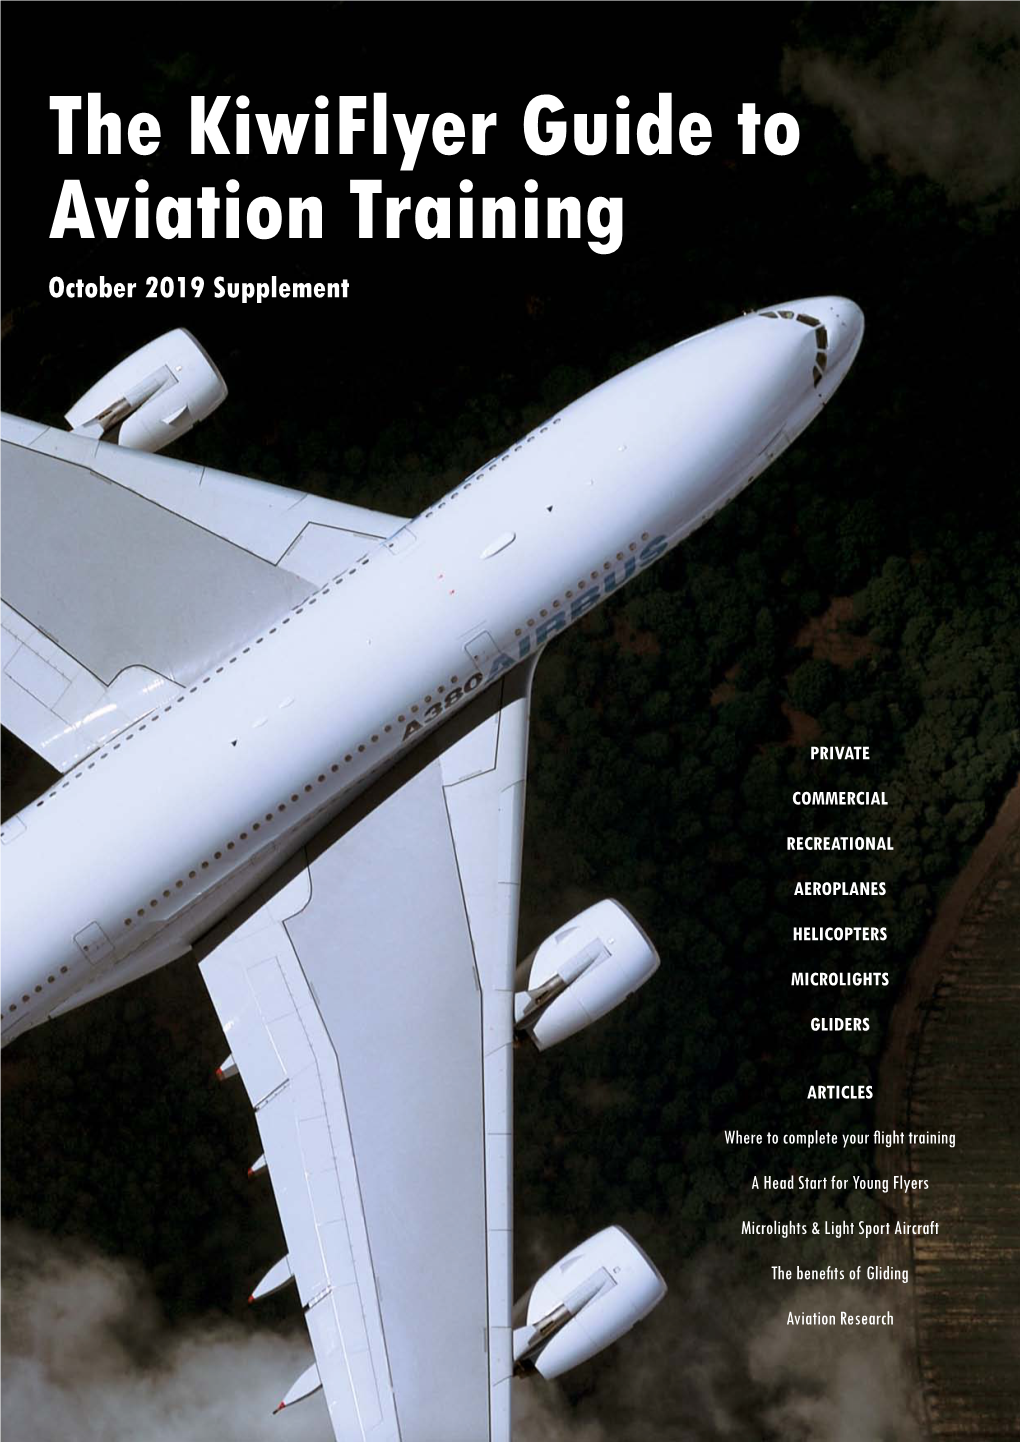 The Kiwiflyer Guide to Aviation Training October 2019 Supplement